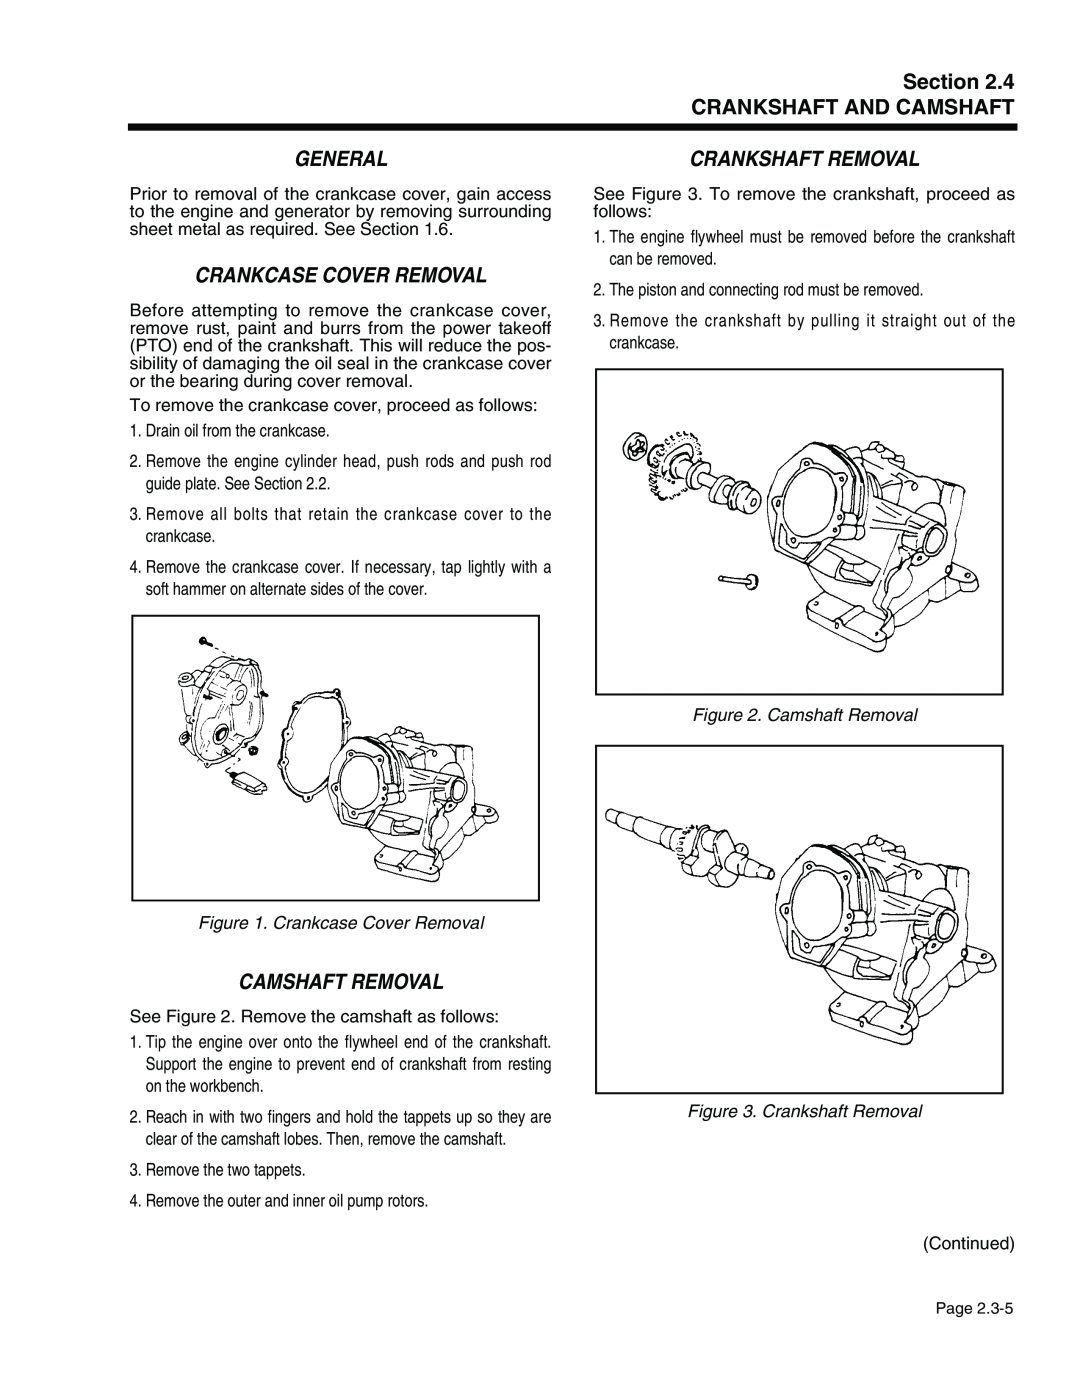 Generac Power Systems 941-2 Section CRANKSHAFT AND CAMSHAFT, Crankcase Cover Removal, Camshaft Removal, Crankshaft Removal 